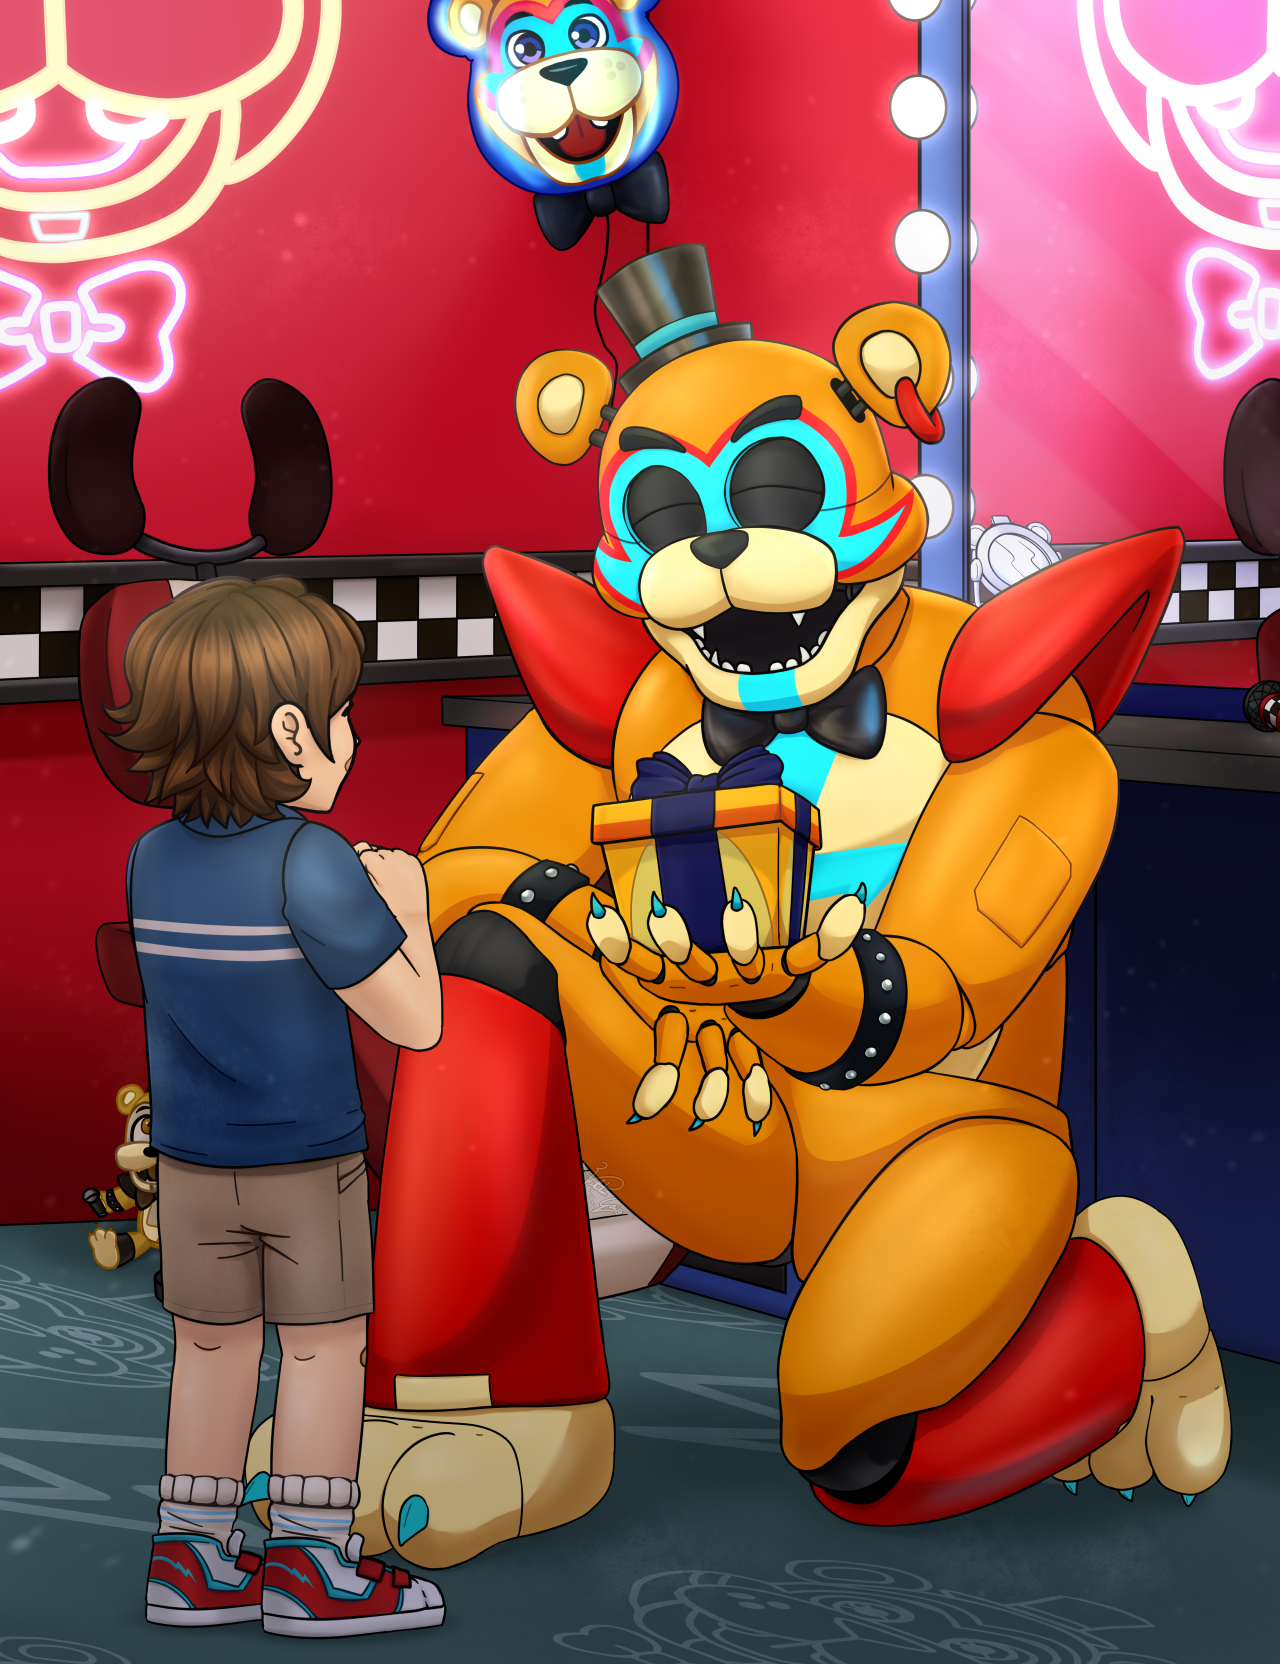 Is someone there? - FNAF Security Breach DLC by ValentinGaio on